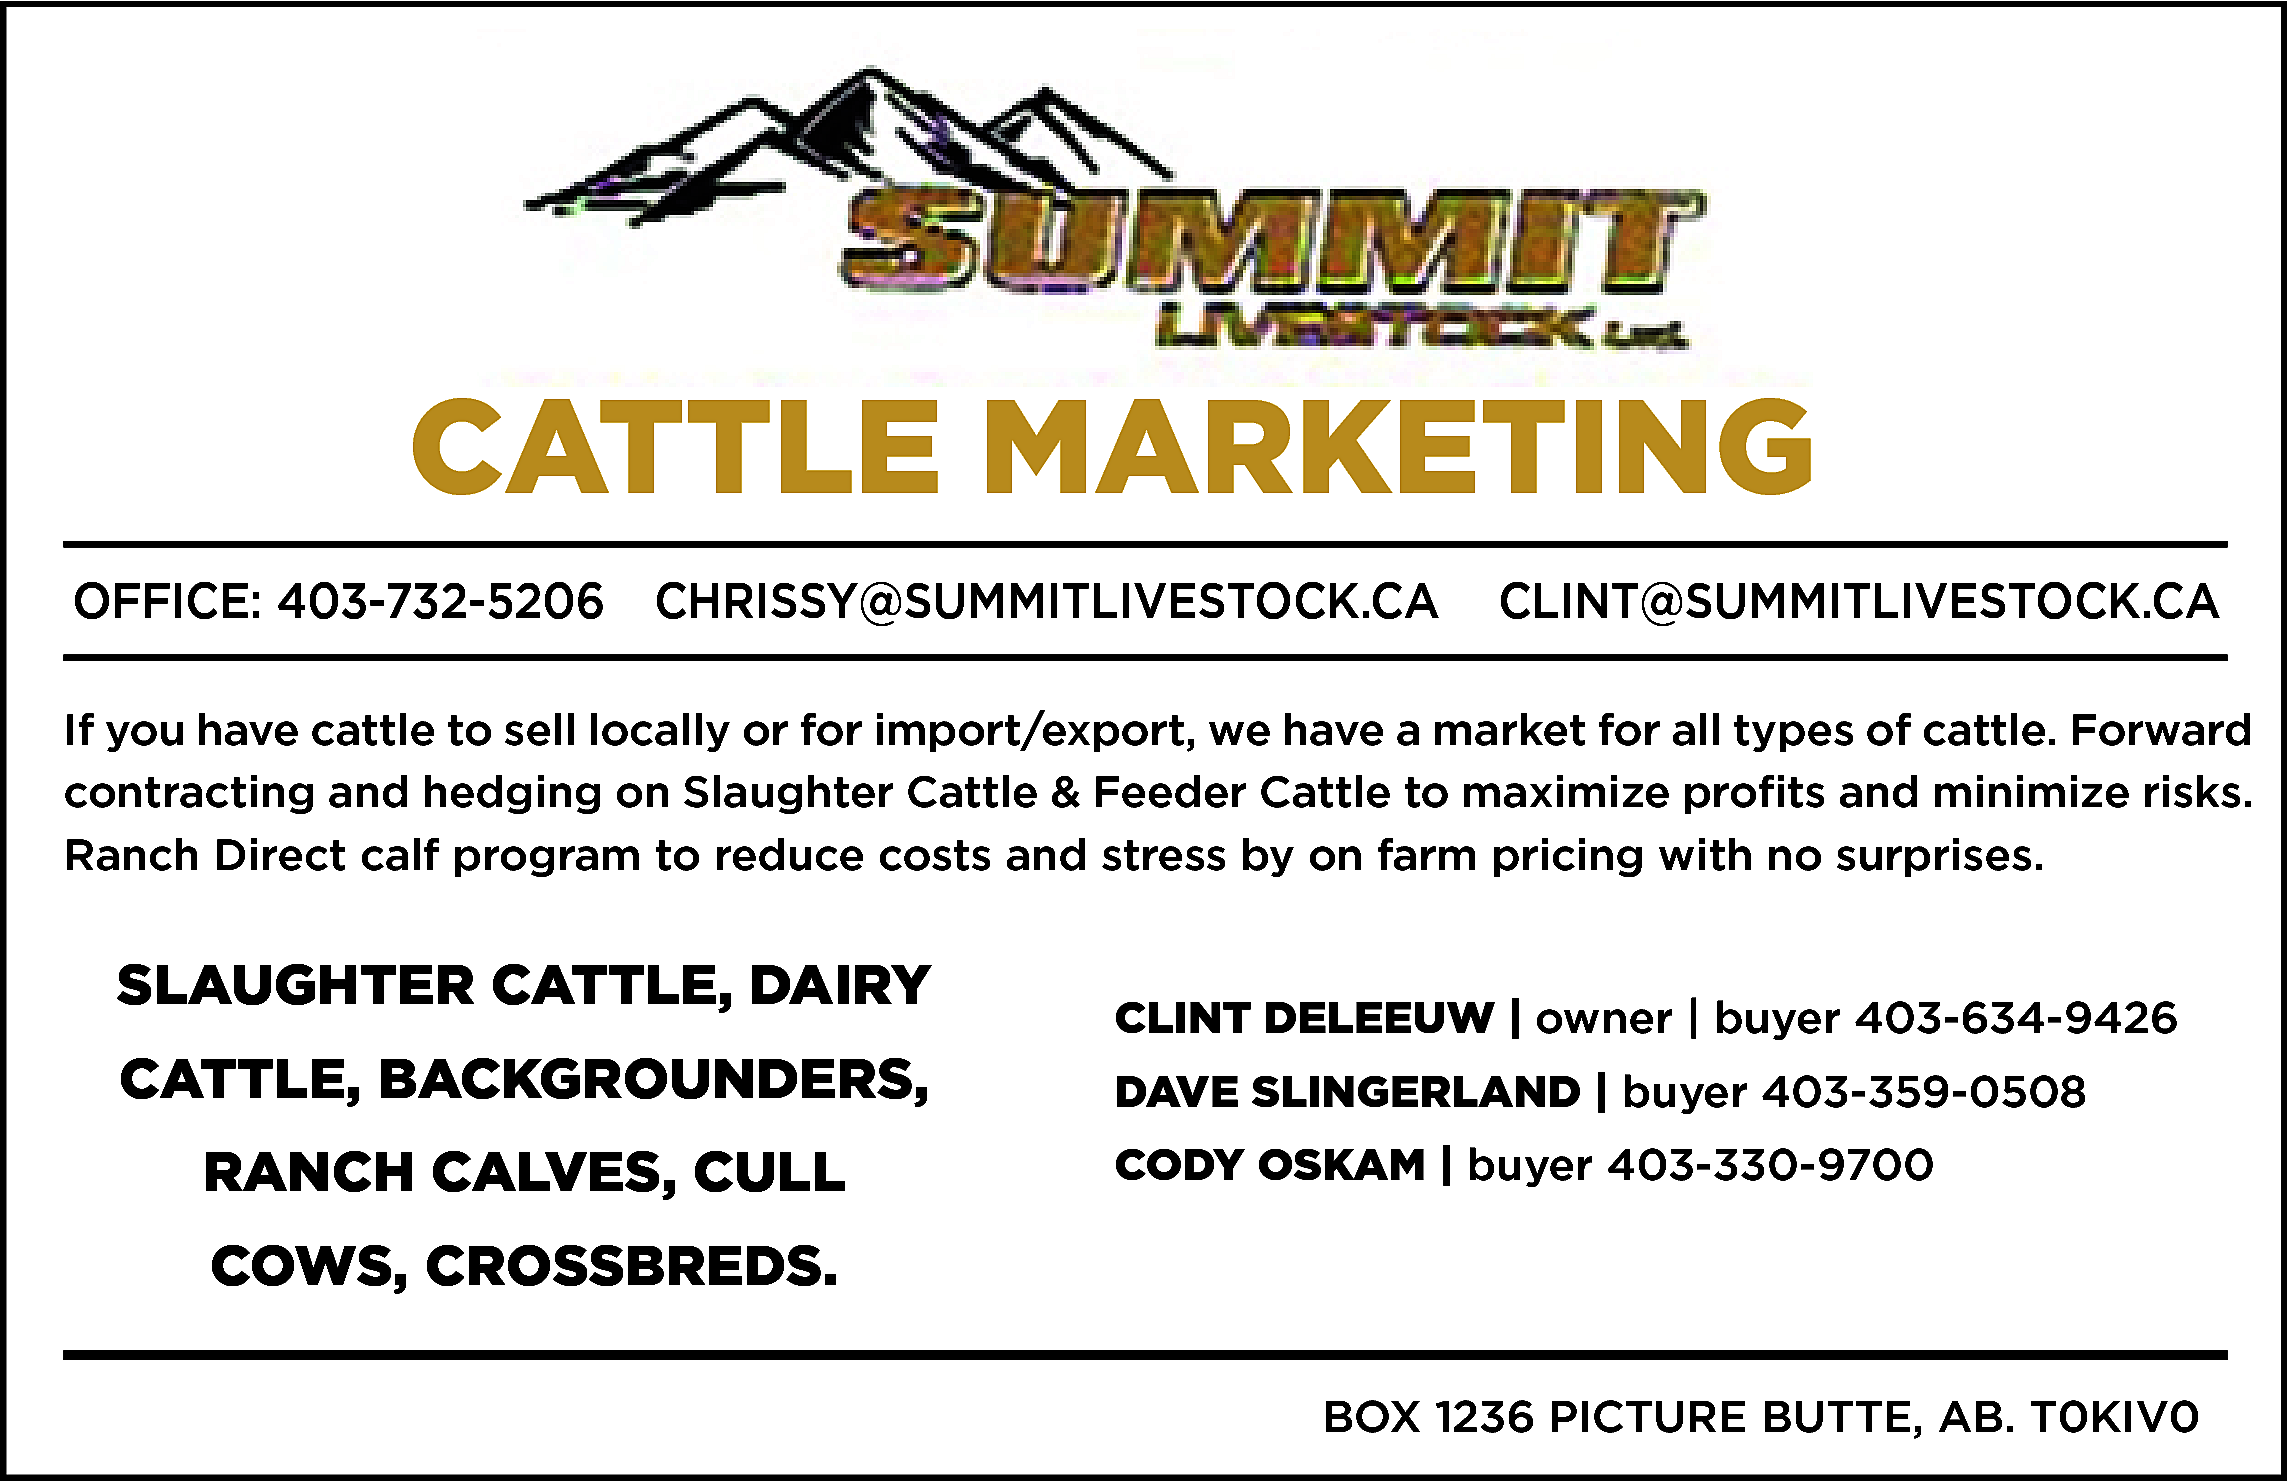 CATTLE MARKETING <br>OFFICE: 403-732-5206 CHRISSY@SUMMITLIVESTOCK.CA  CATTLE MARKETING  OFFICE: 403-732-5206 CHRISSY@SUMMITLIVESTOCK.CA    CLINT@SUMMITLIVESTOCK.CA    If you have cattle to sell locally or for import/export, we have a market for all types of cattle. Forward  contracting and hedging on Slaughter Cattle & Feeder Cattle to maximize profits and minimize risks.  Ranch Direct calf program to reduce costs and stress by on farm pricing with no surprises.    SLAUGHTER CATTLE, DAIRY  CATTLE, BACKGROUNDERS,  RANCH CALVES, CULL    CLINT DELEEUW | owner | buyer 403-634-9426  DAVE SLINGERLAND | buyer 403-359-0508  CODY OSKAM | buyer 403-330-9700    COWS, CROSSBREDS.  BOX 1236 PICTURE BUTTE, AB. T0KIV0    